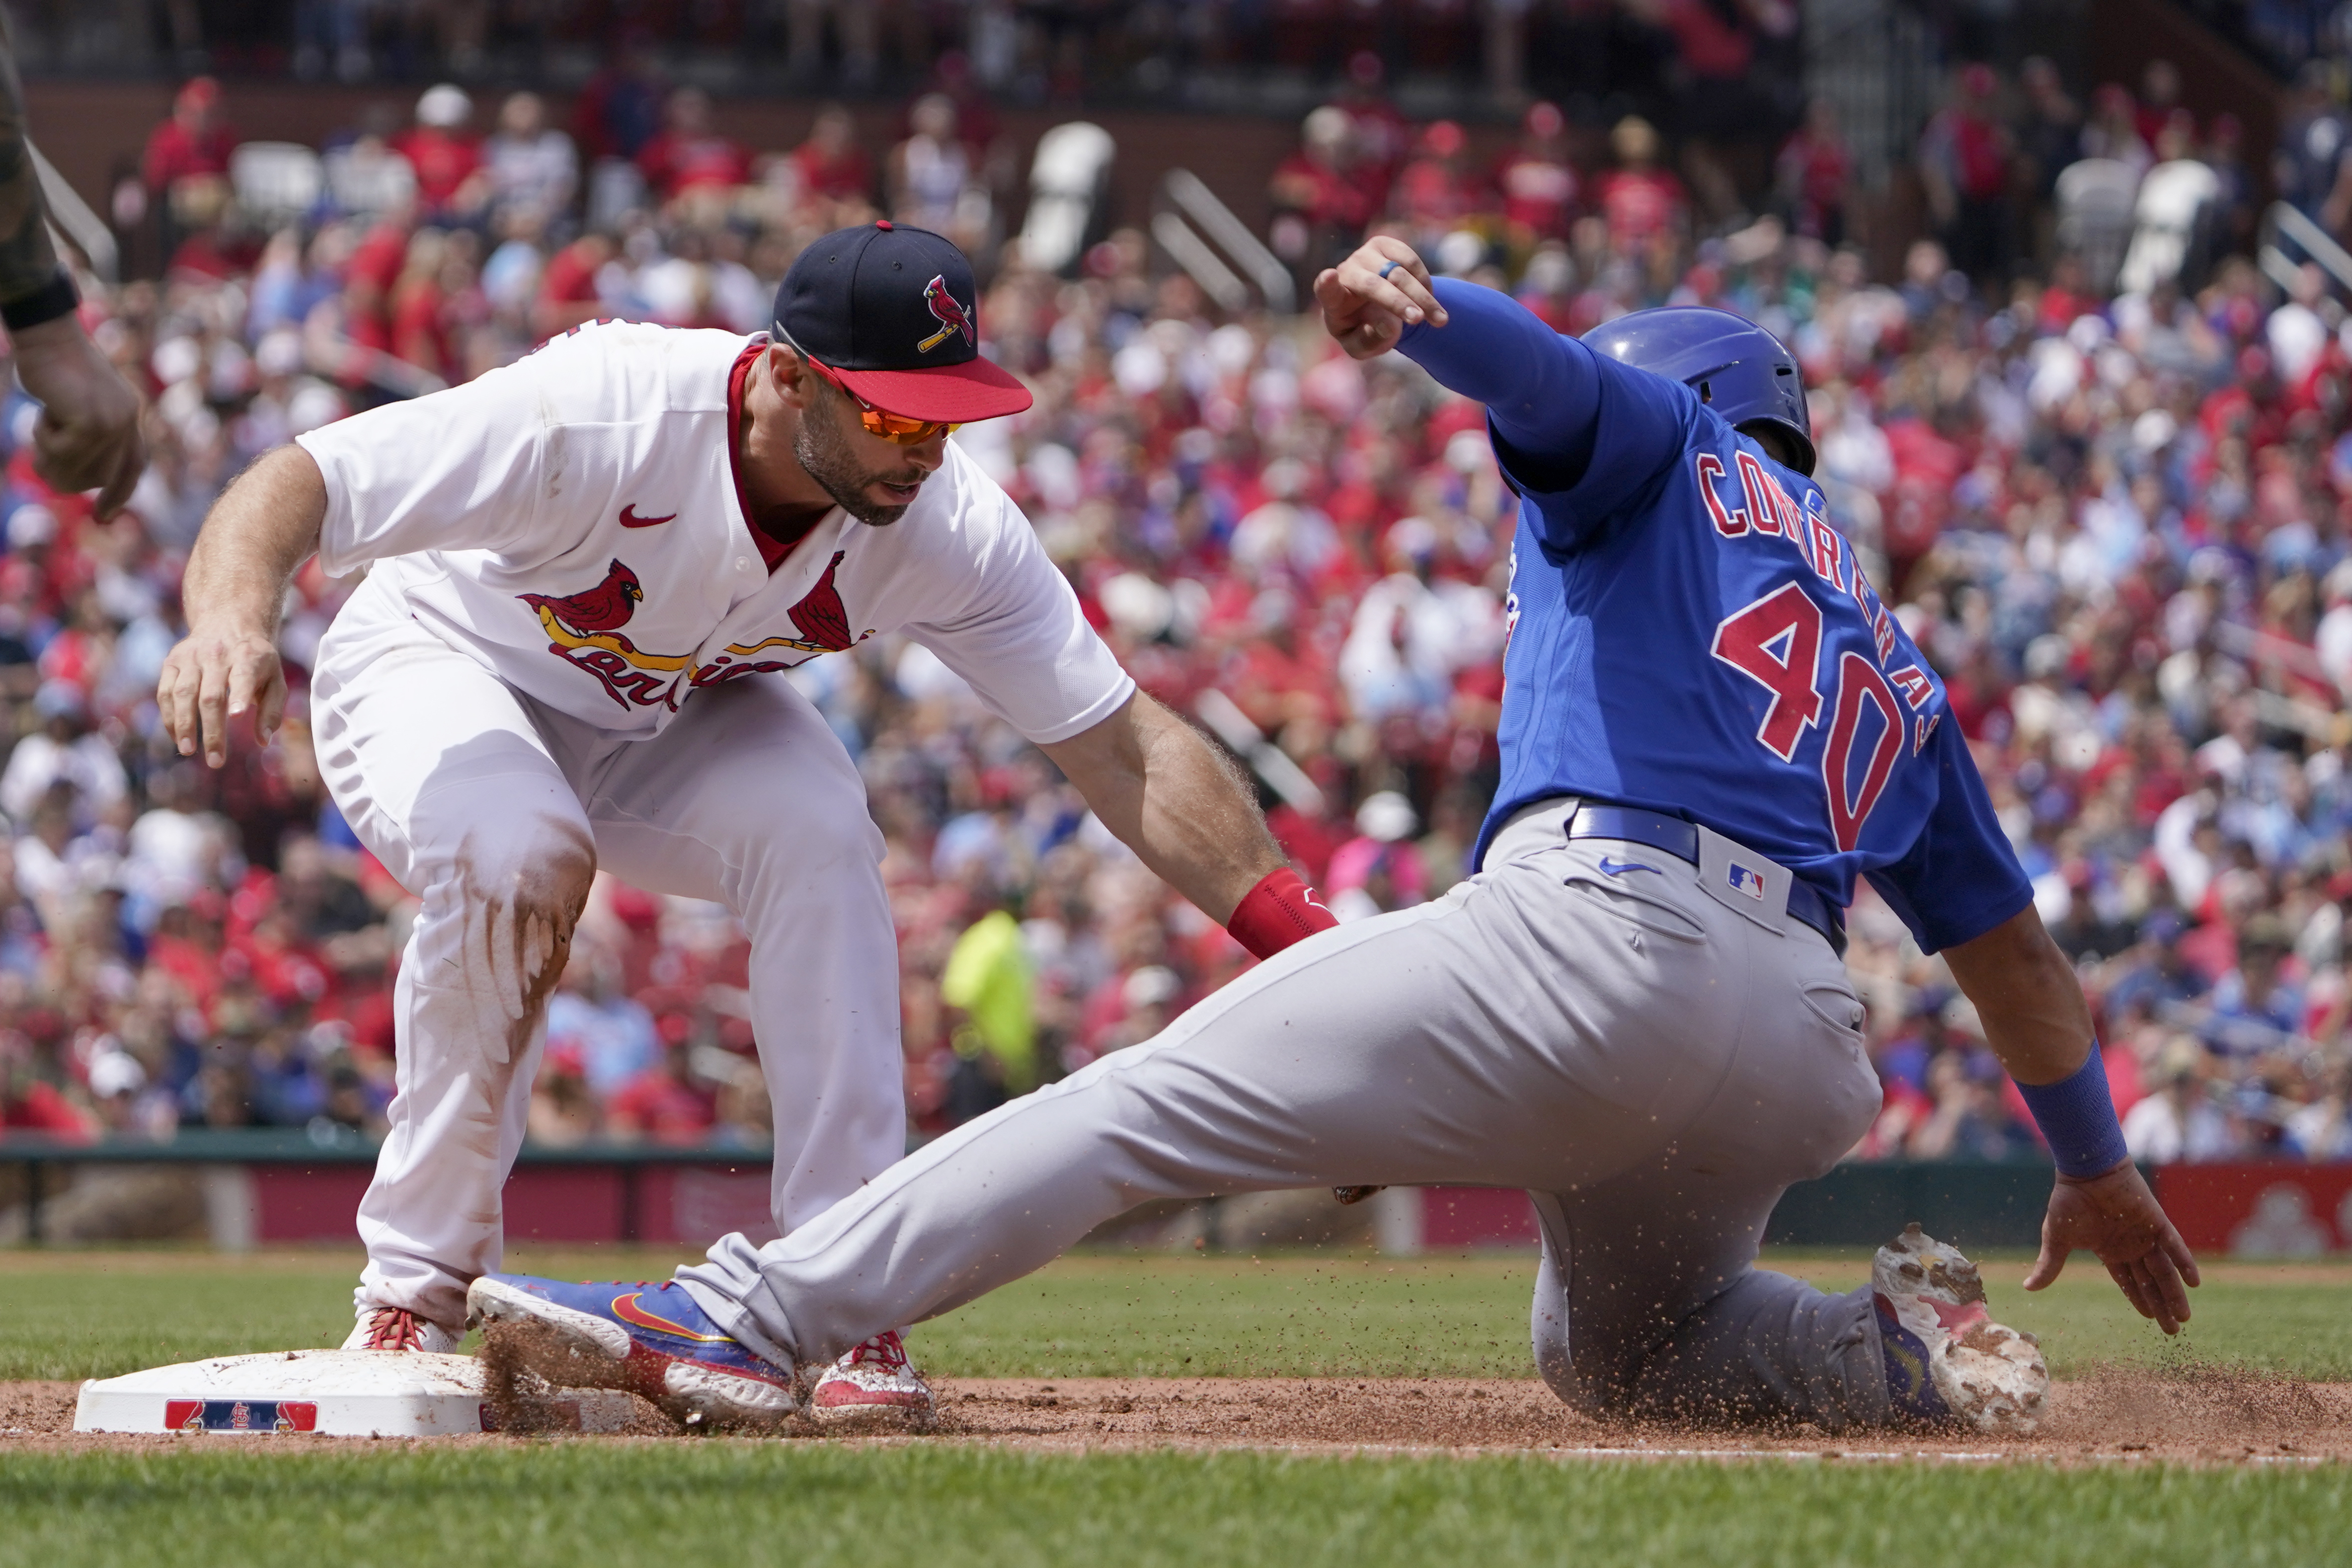 How to Watch the MLB London Series: Chicago Cubs vs. St. Louis